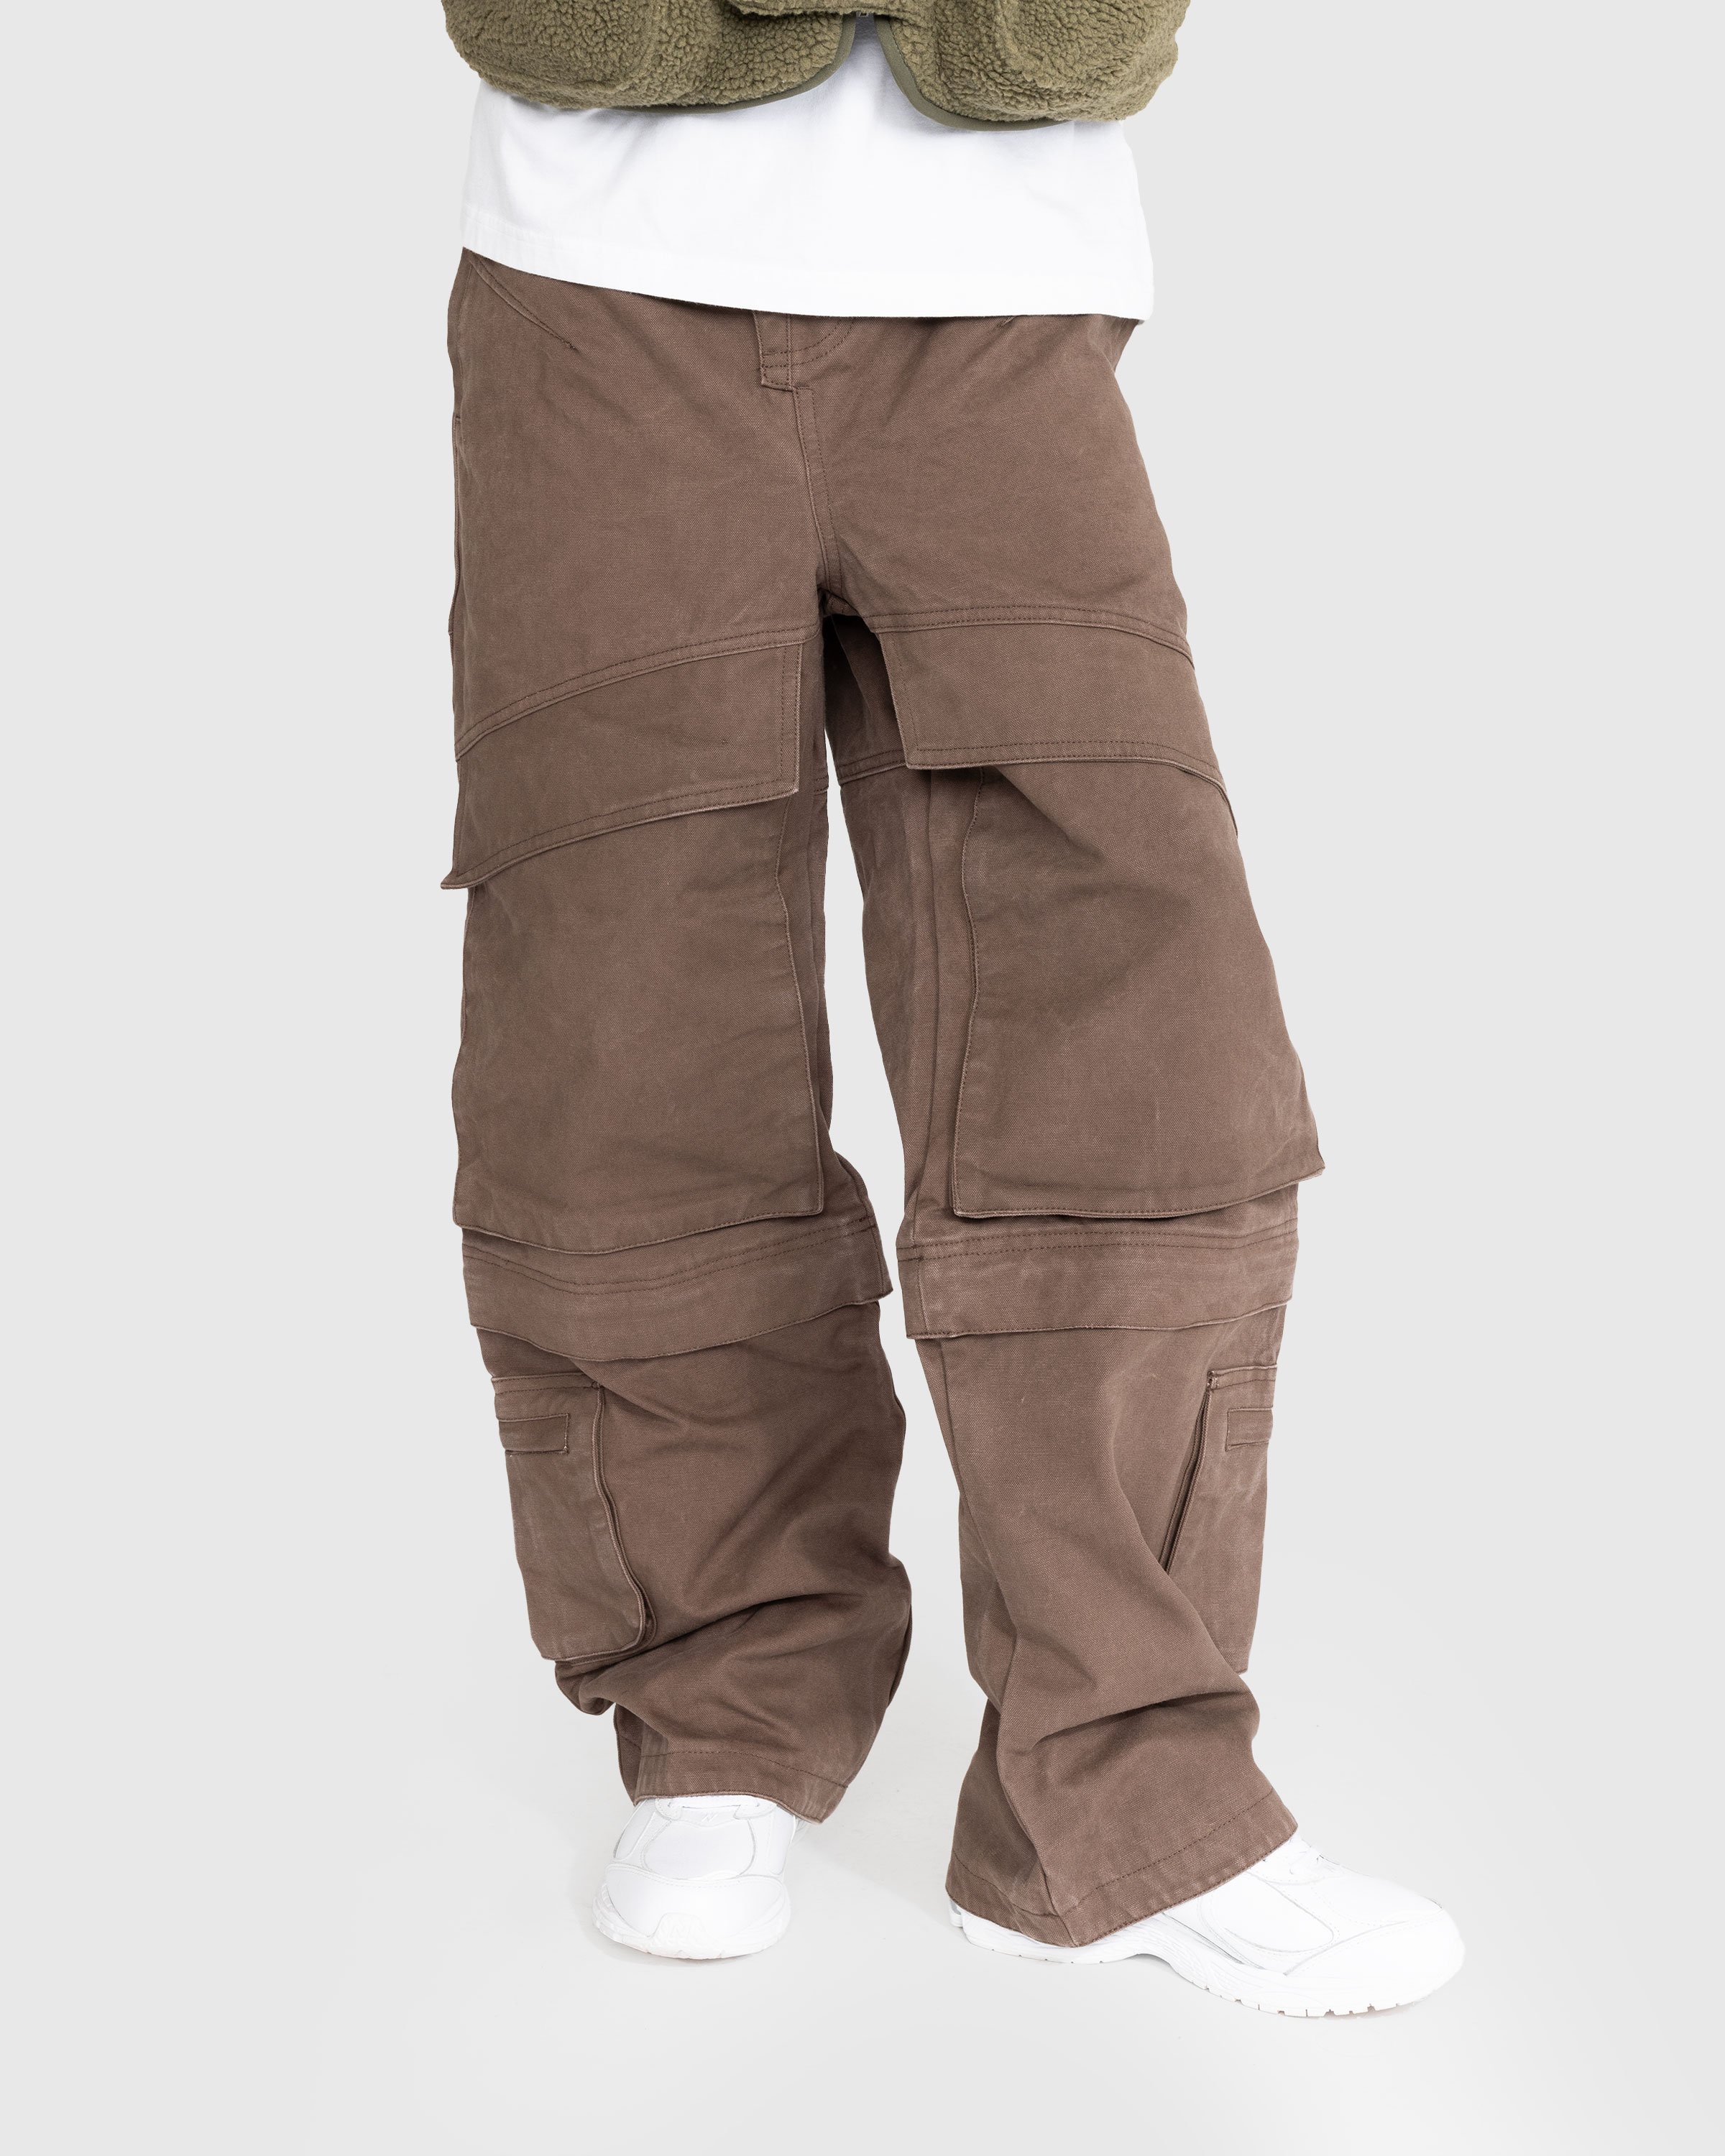 Entire Studios - Hard Cargo Carbon - Clothing - Brown - Image 2